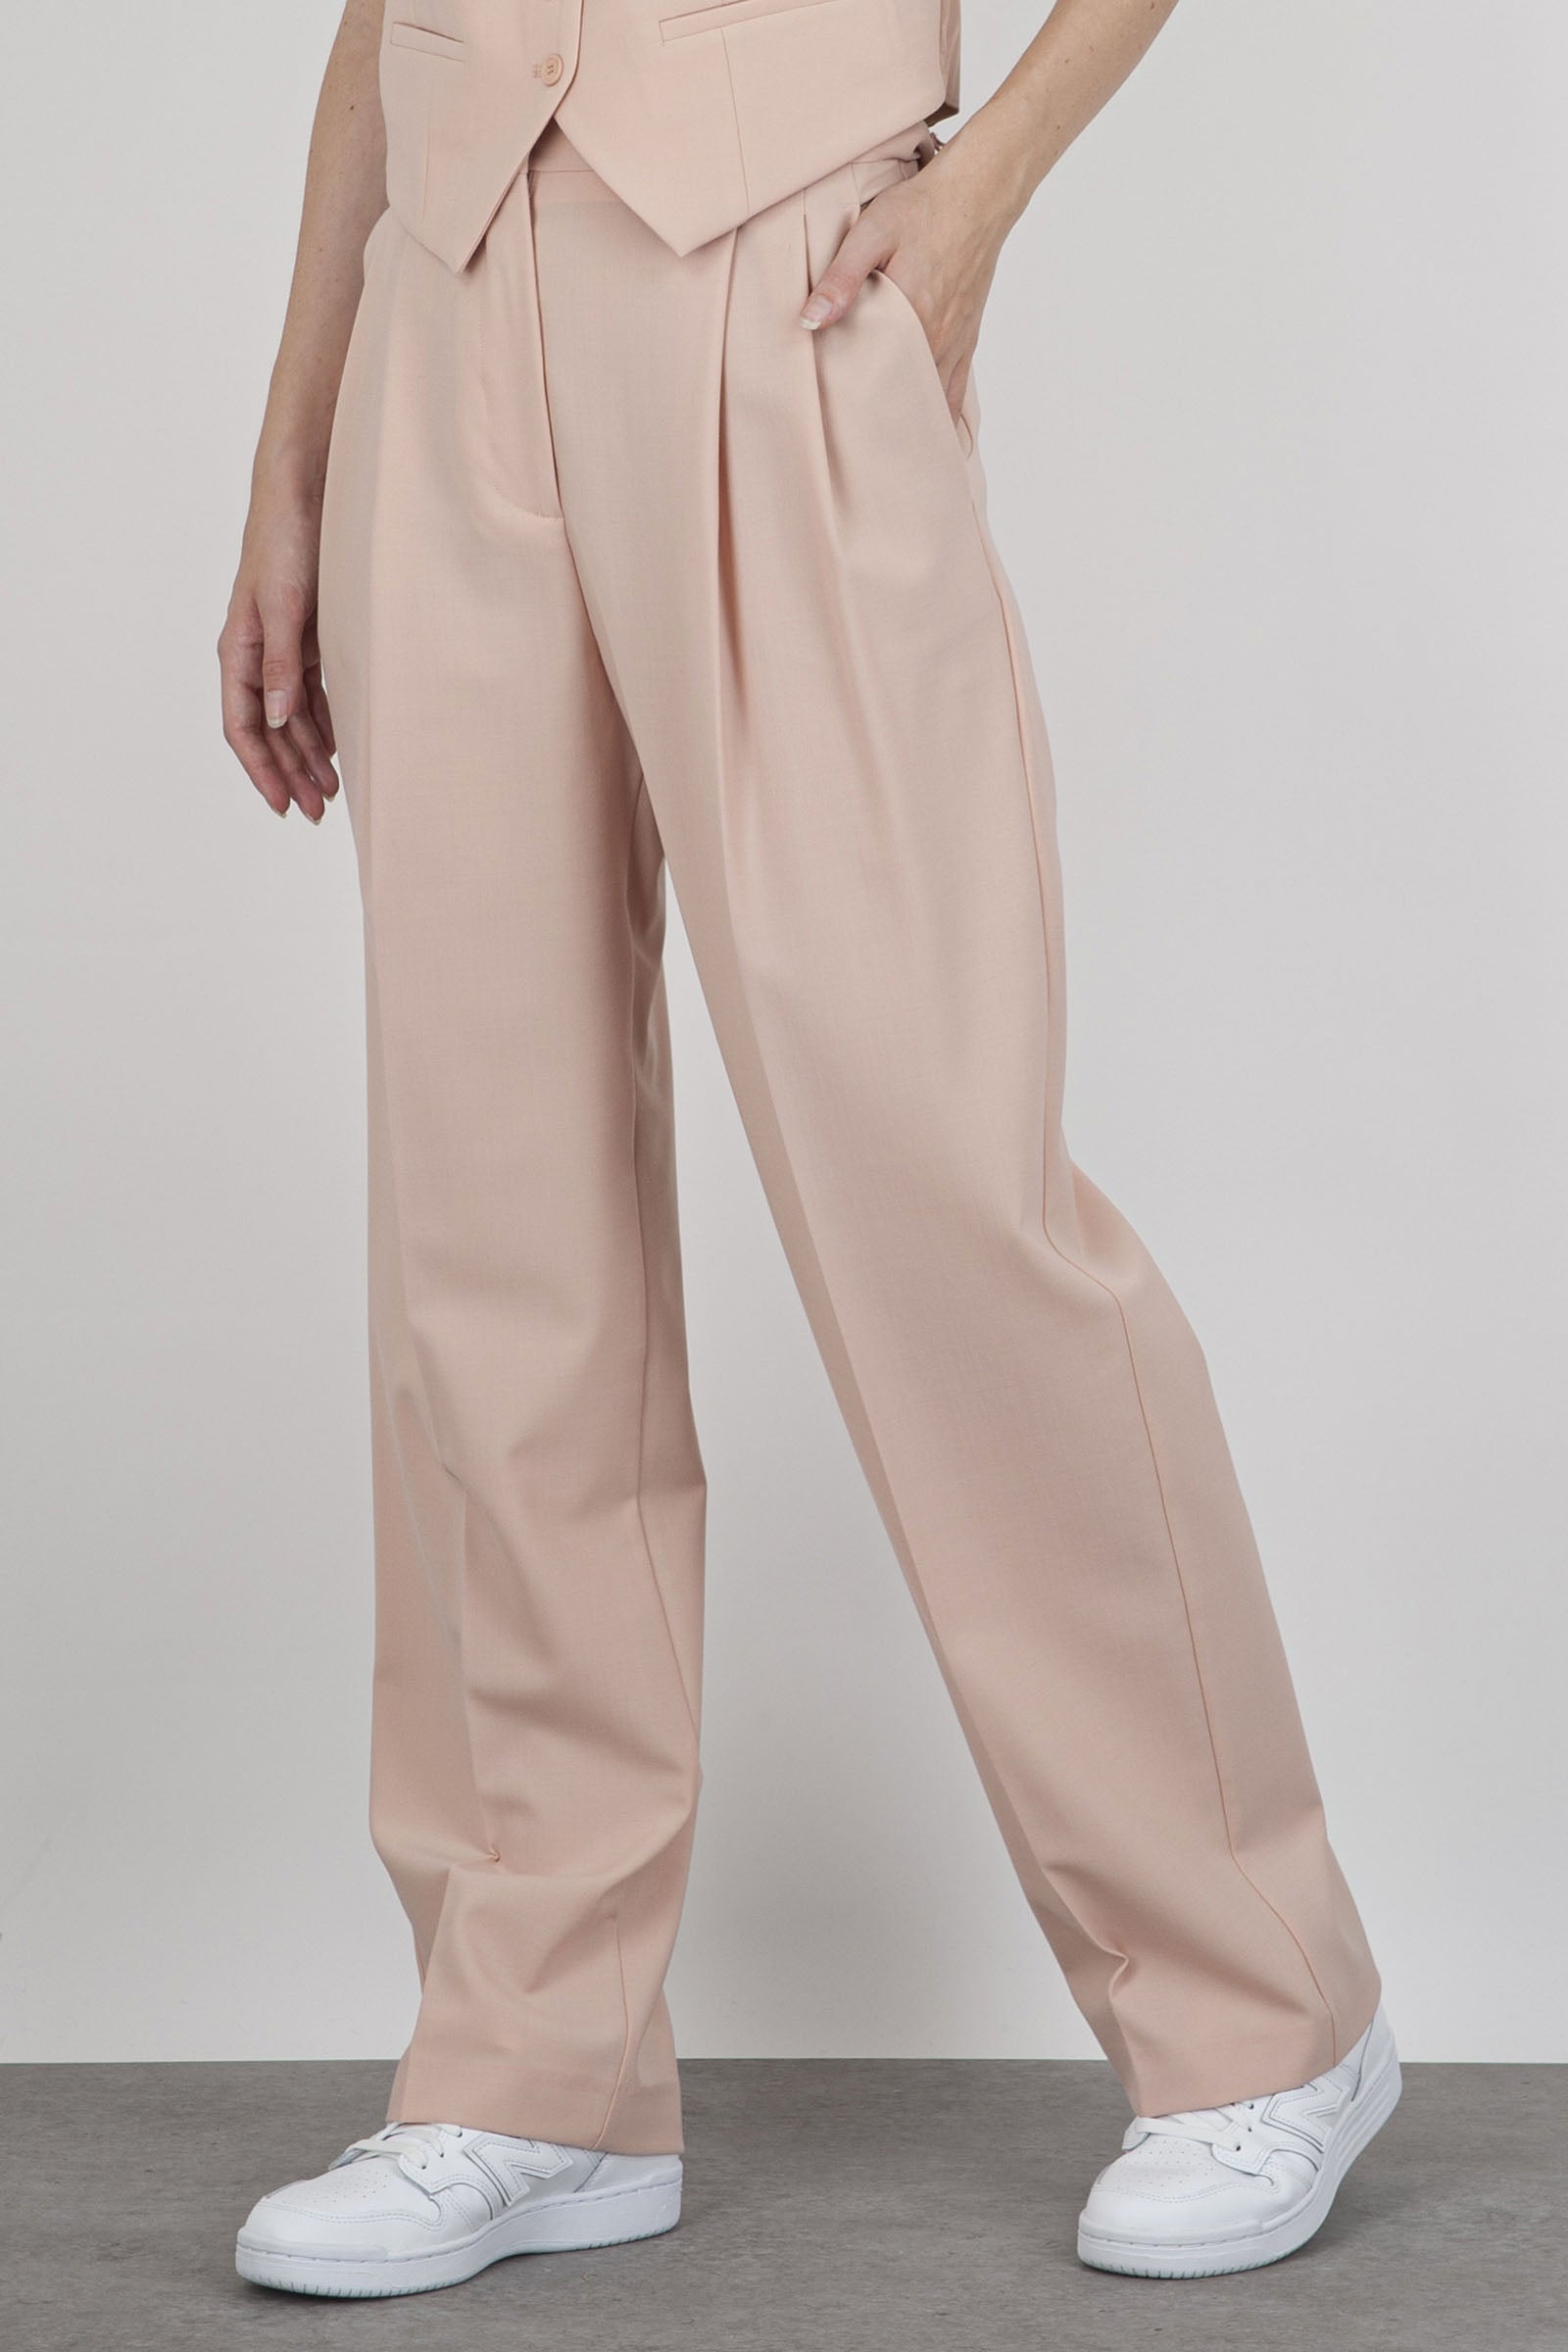 Semicouture Jody Synthetic Powder Pink Trousers - 4